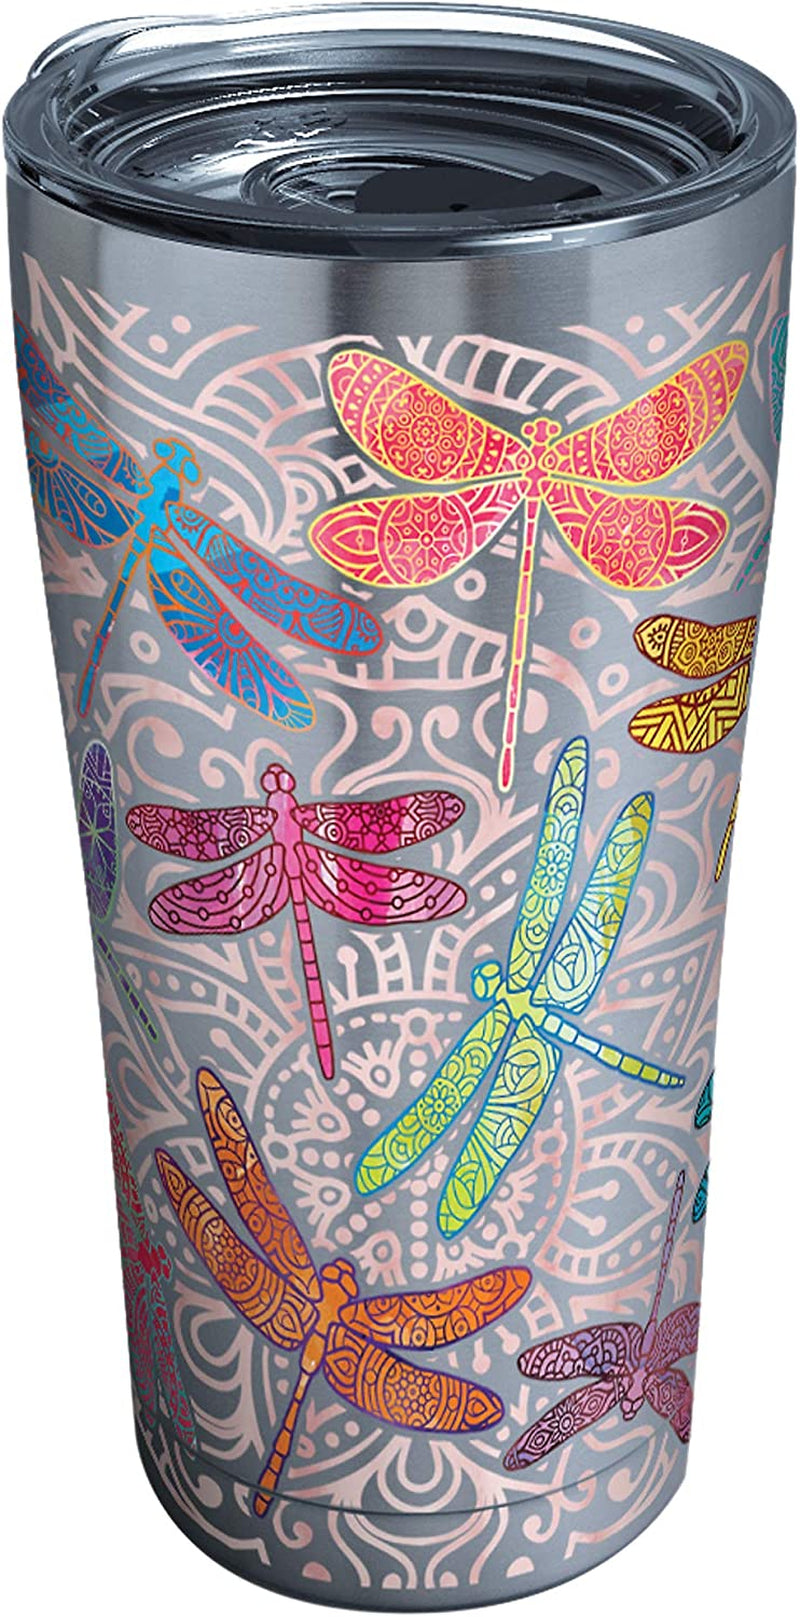 Tervis Made in USA Double Walled Dragonfly Mandala Insulated Tumbler Cup Keeps Drinks Cold & Hot, 24Oz, Classic Home & Garden > Kitchen & Dining > Tableware > Drinkware Tervis Stainless Steel 20oz 